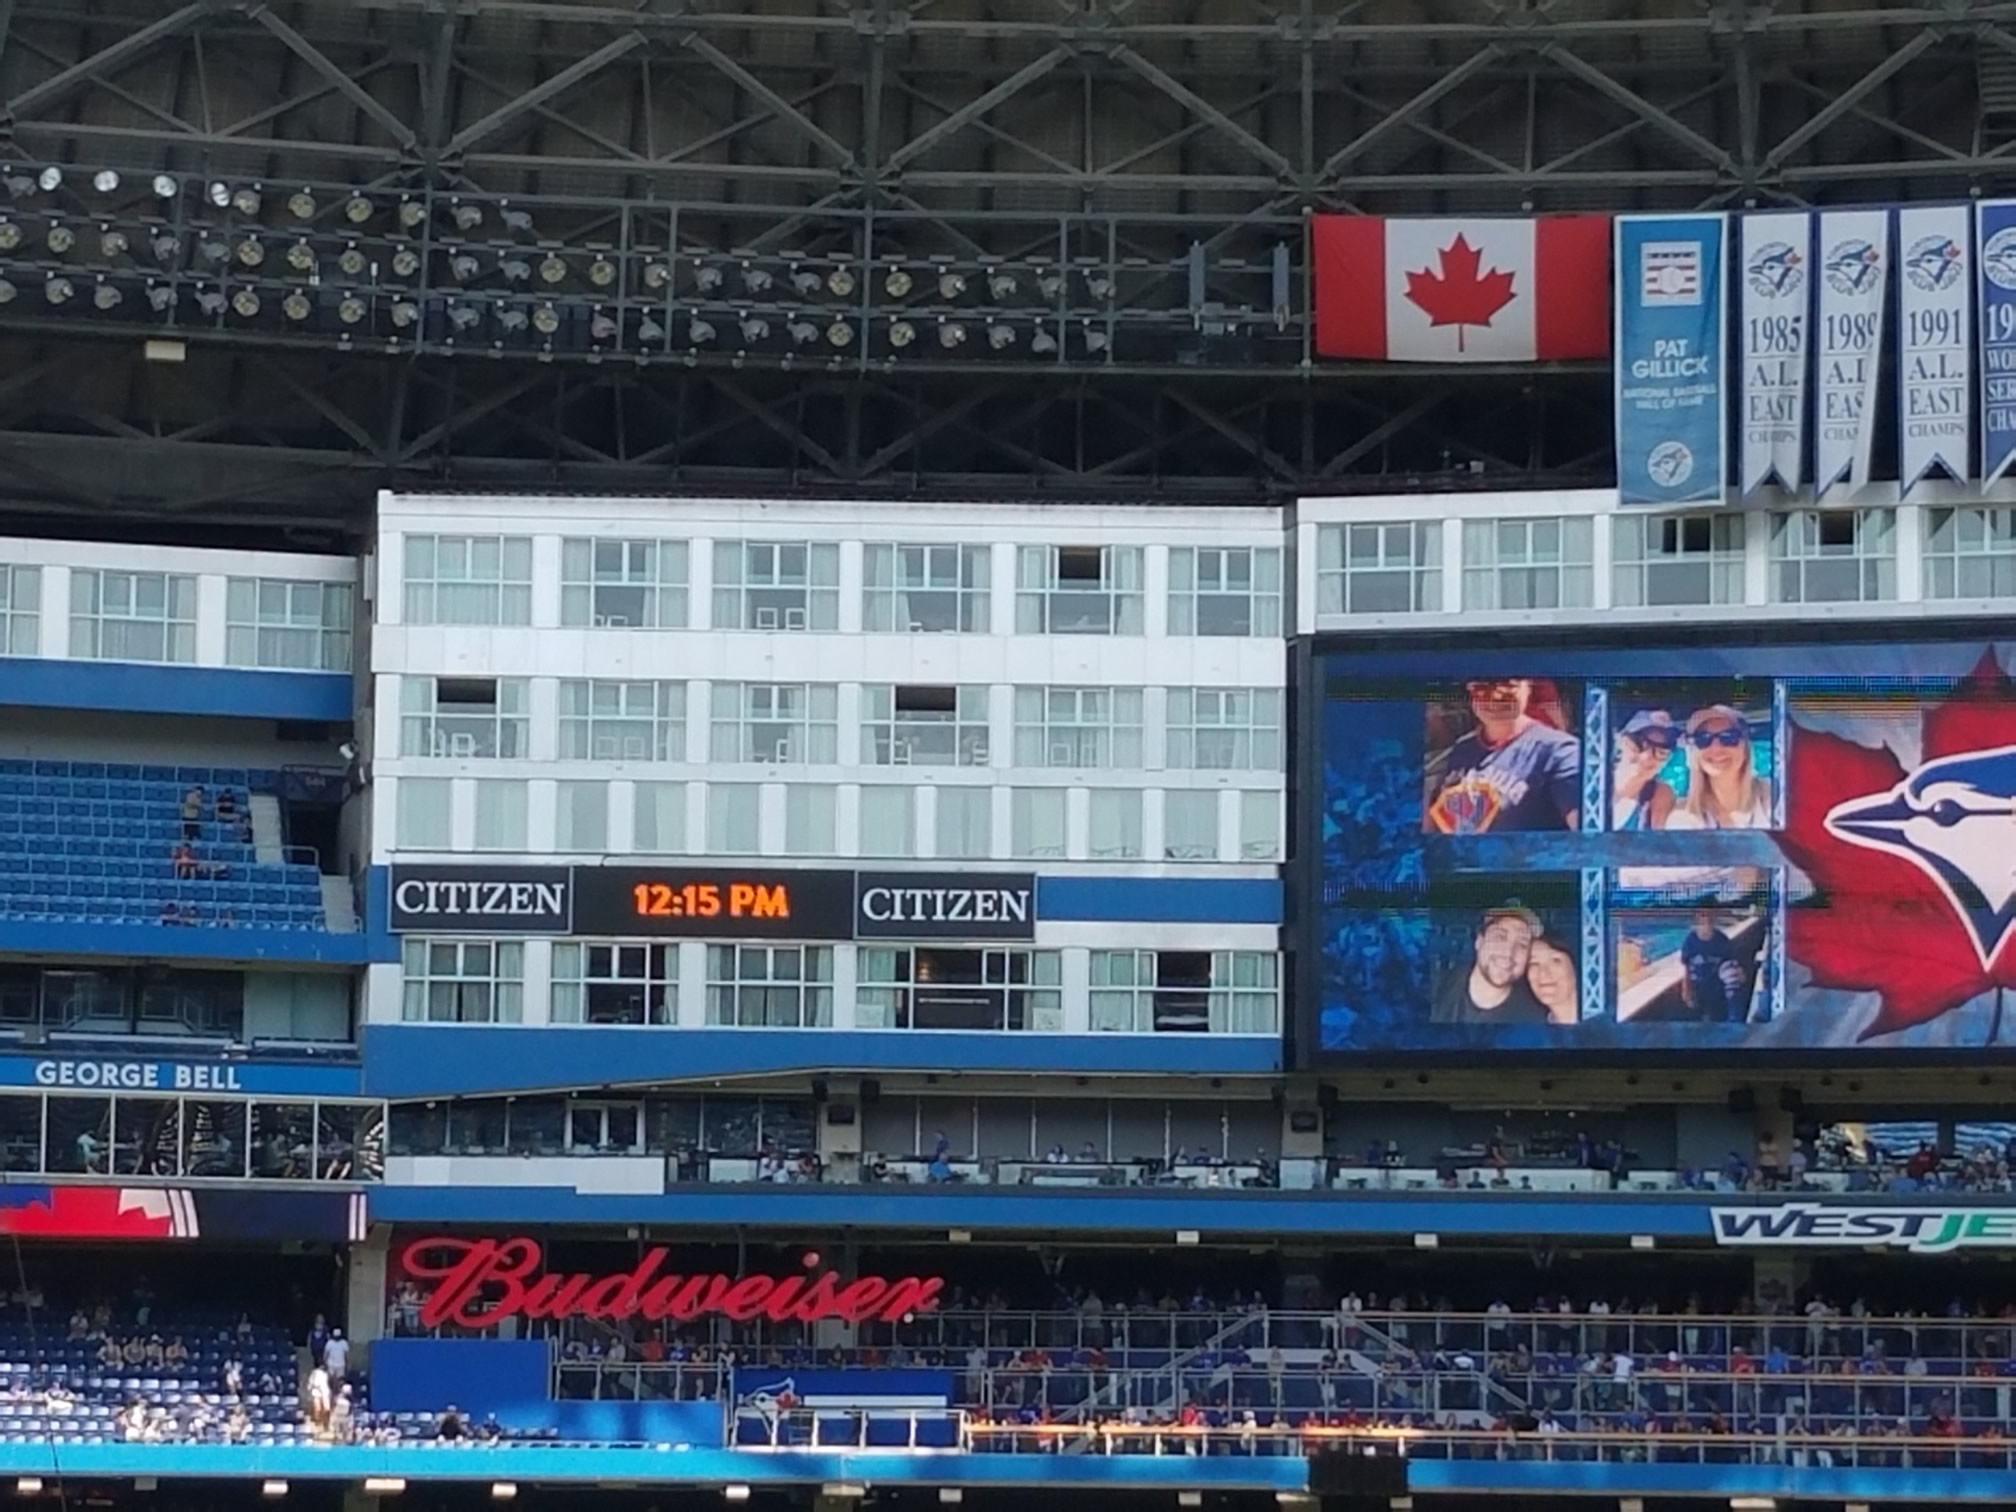 Section 521 at Rogers Centre 